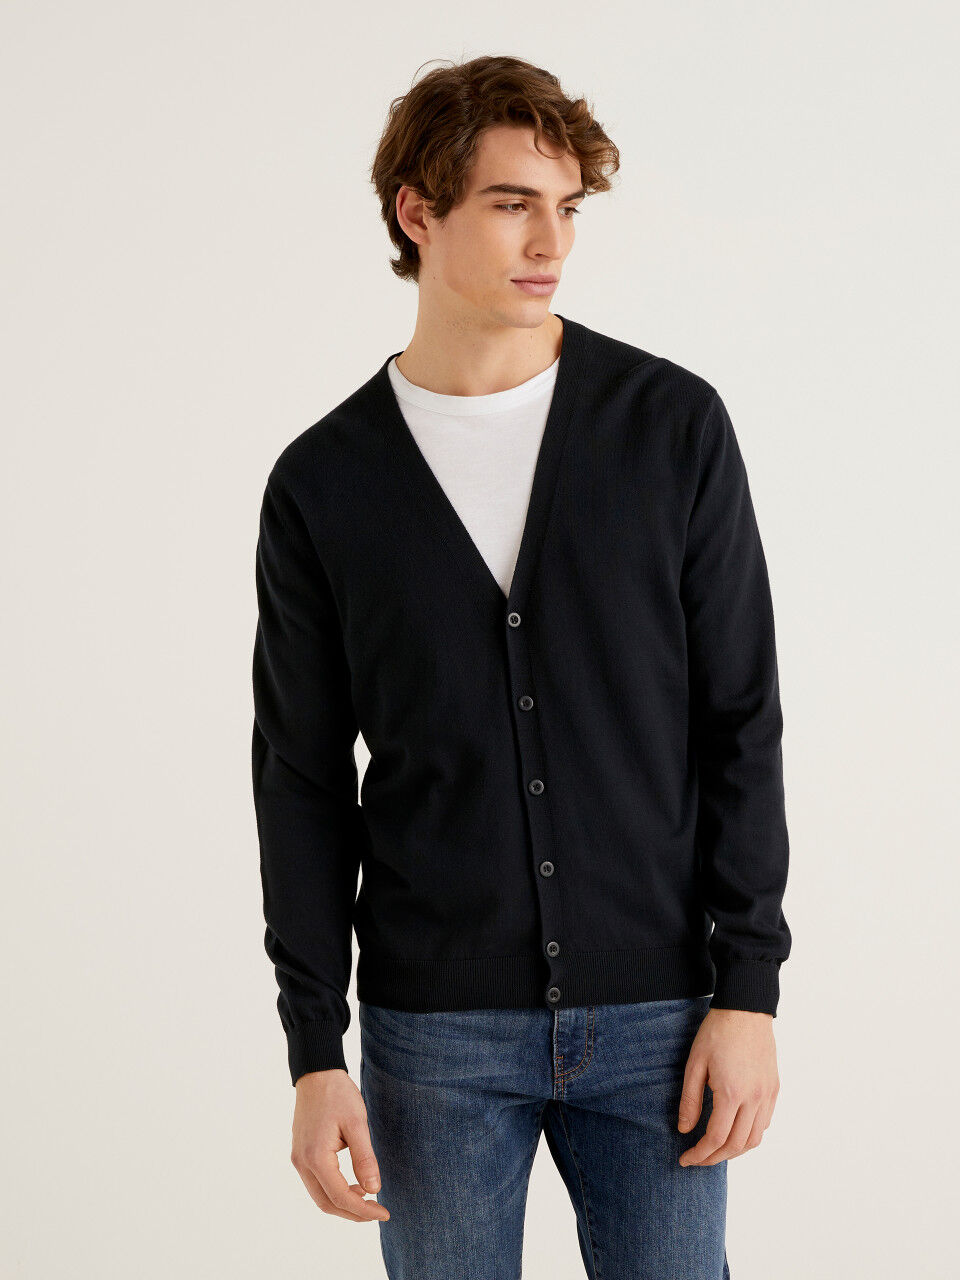 Men's Cardigans New Collection 2022 ...